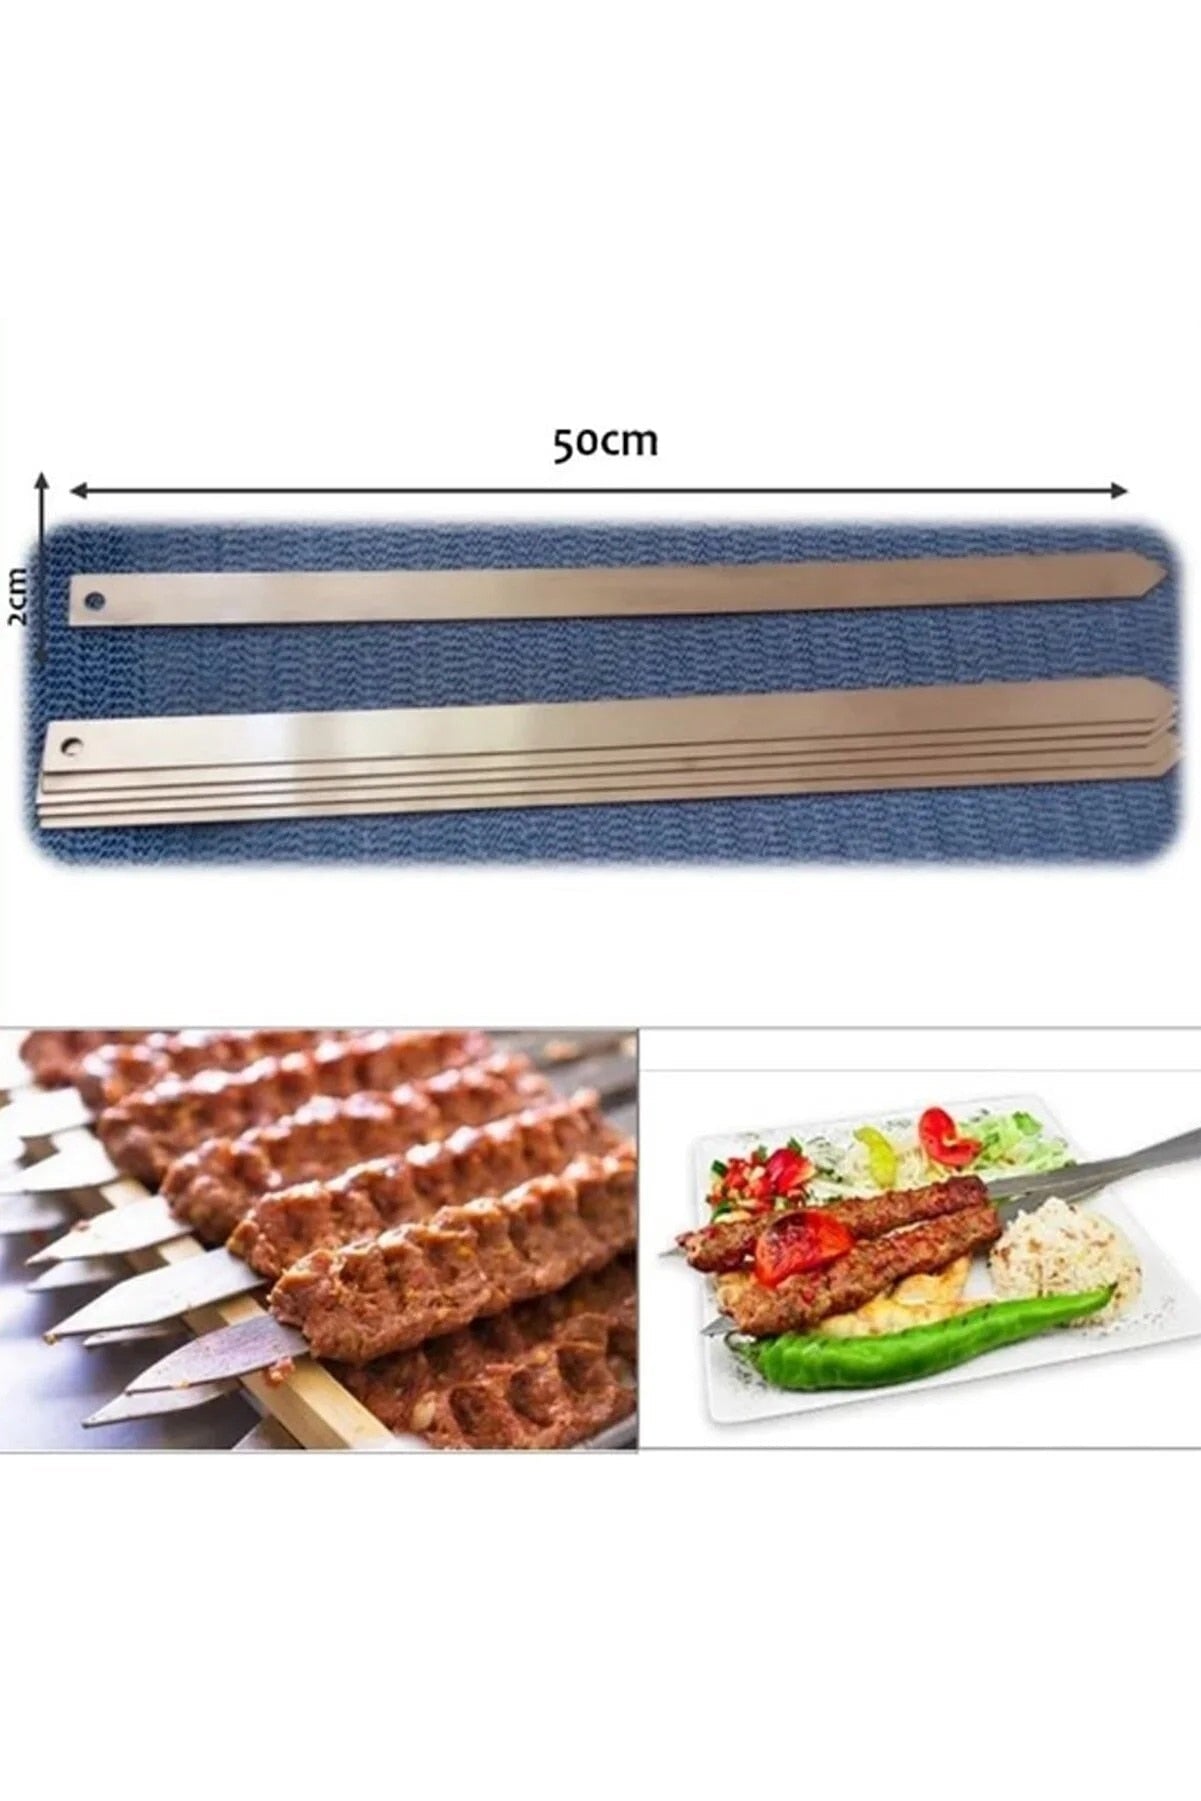 50cm Adana Kebab Skewers - Premium Galvanized Iron for Delicious Doner Meat Grilling and Shish Cooking Wide Flat BBQ